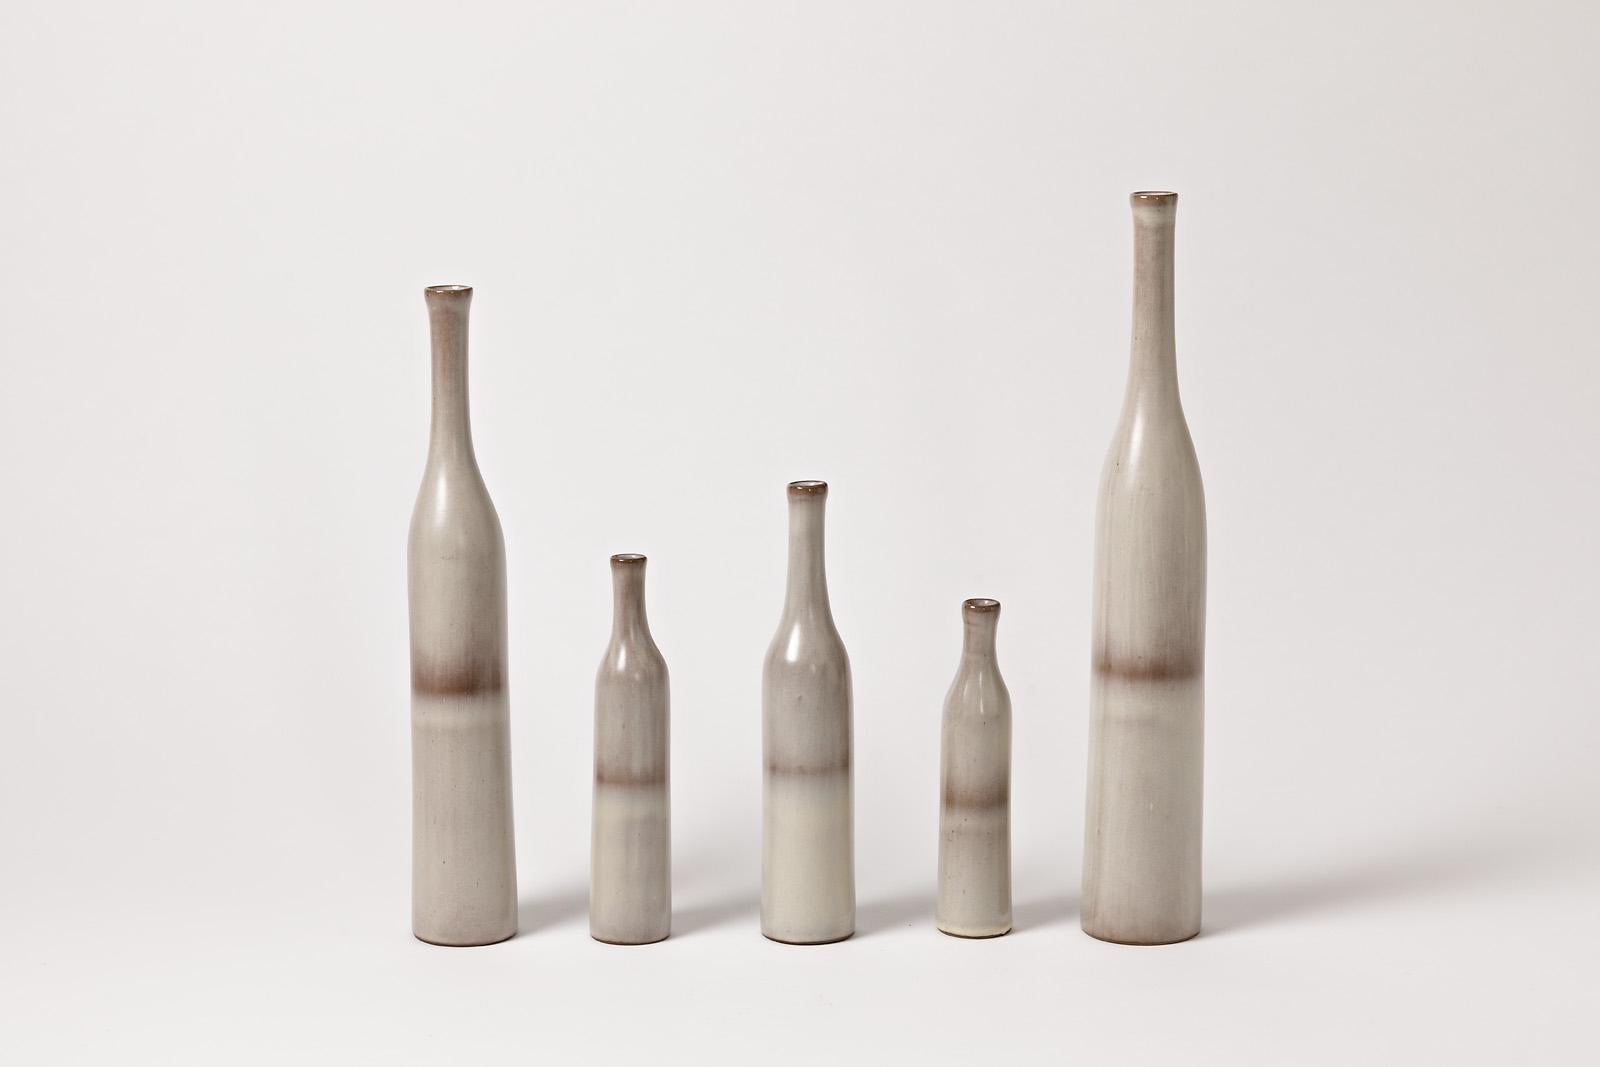 Mid-Century Modern Set of 5 Ceramic Bottles White and Grey Colors by Ruelland Midcentury Design